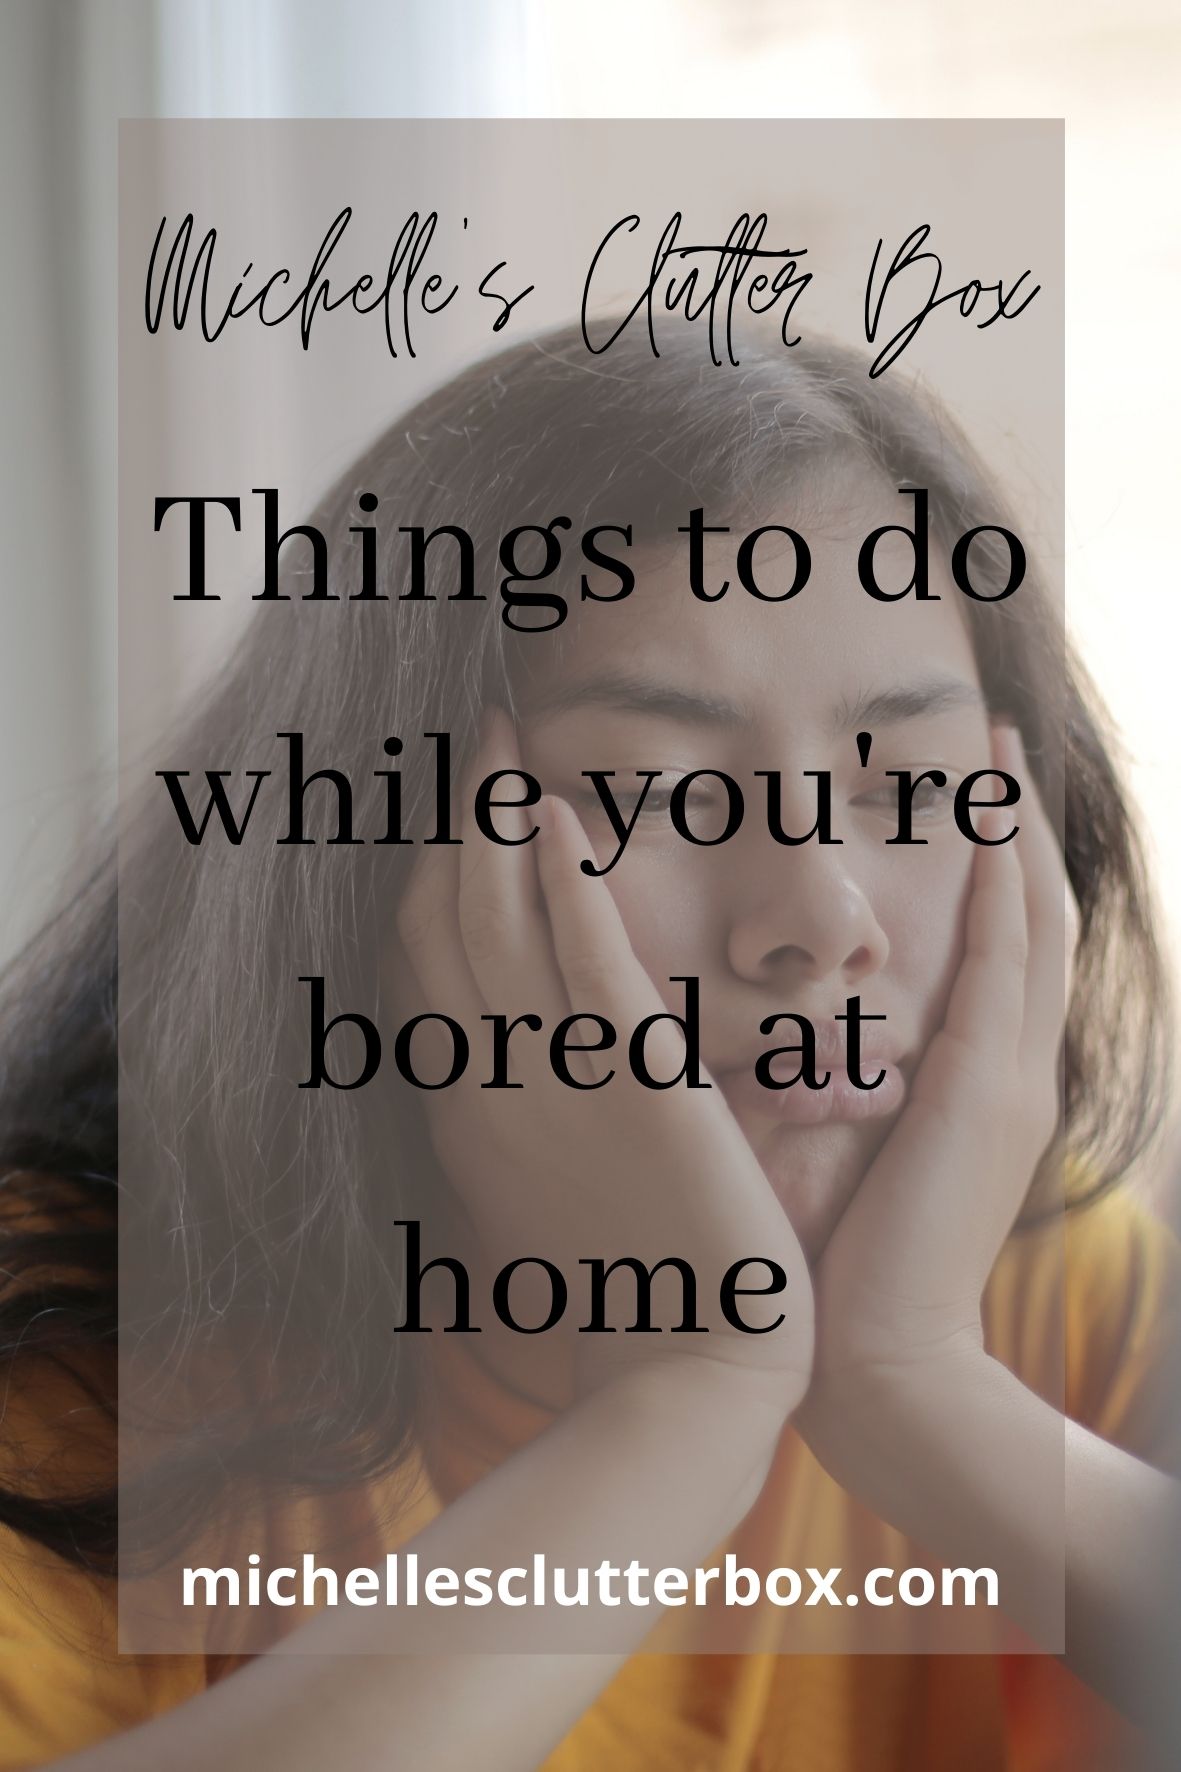 Things to do while you're bored at home